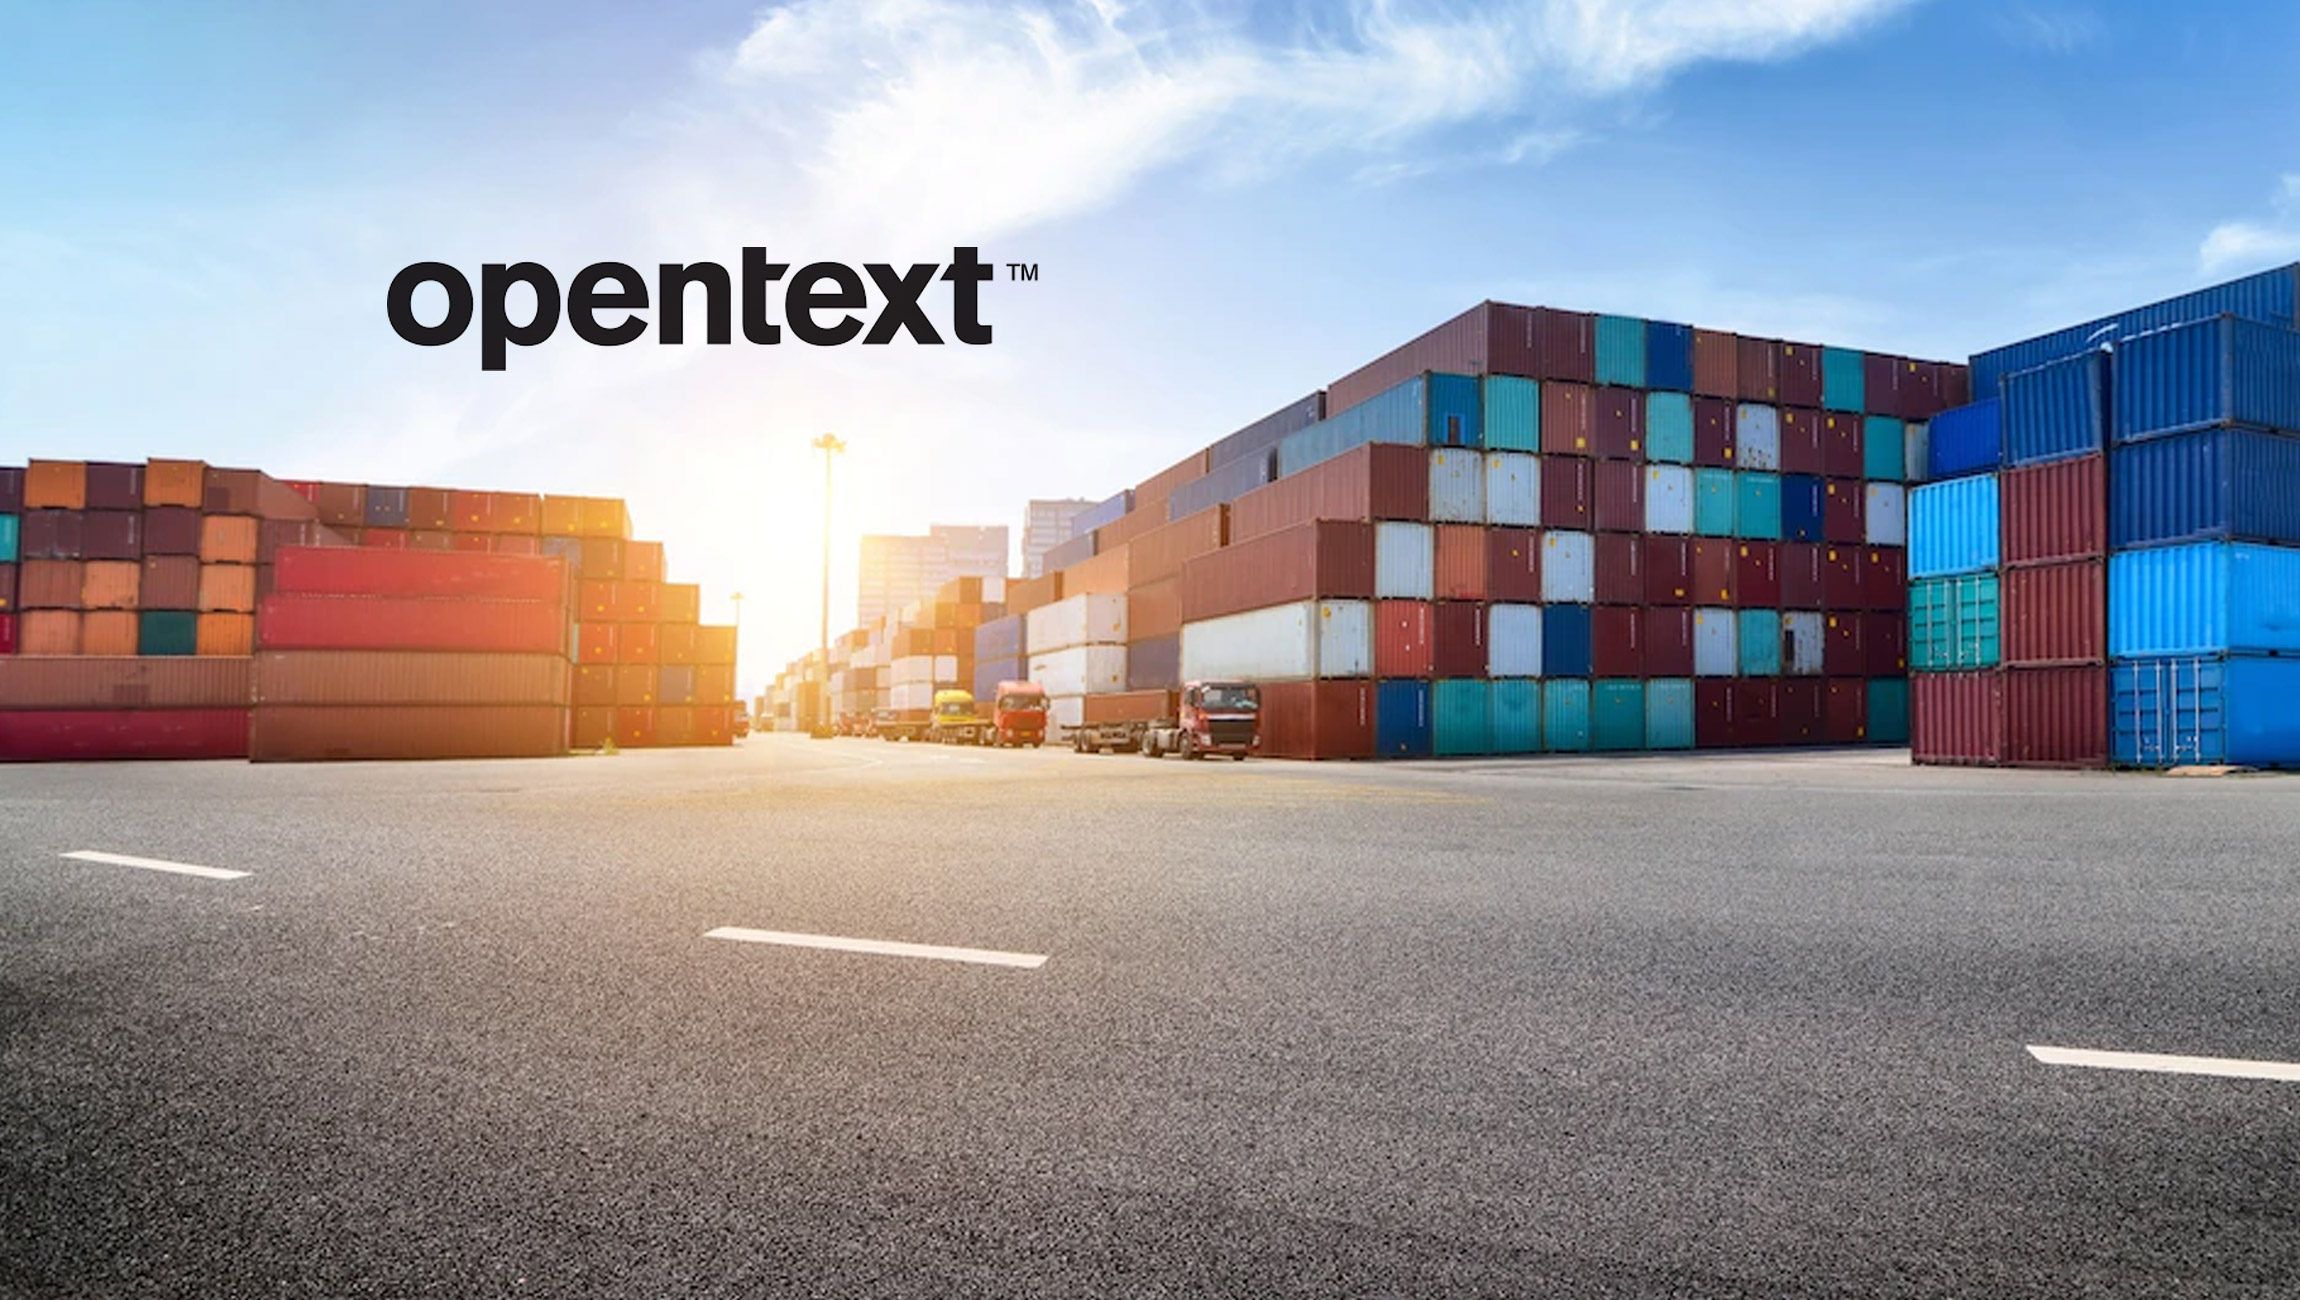 OpenText Commissioned Survey Reports That B2B integration Helps to Improve the Cost, Efficiency, and Visibility of Supply Chain Operations